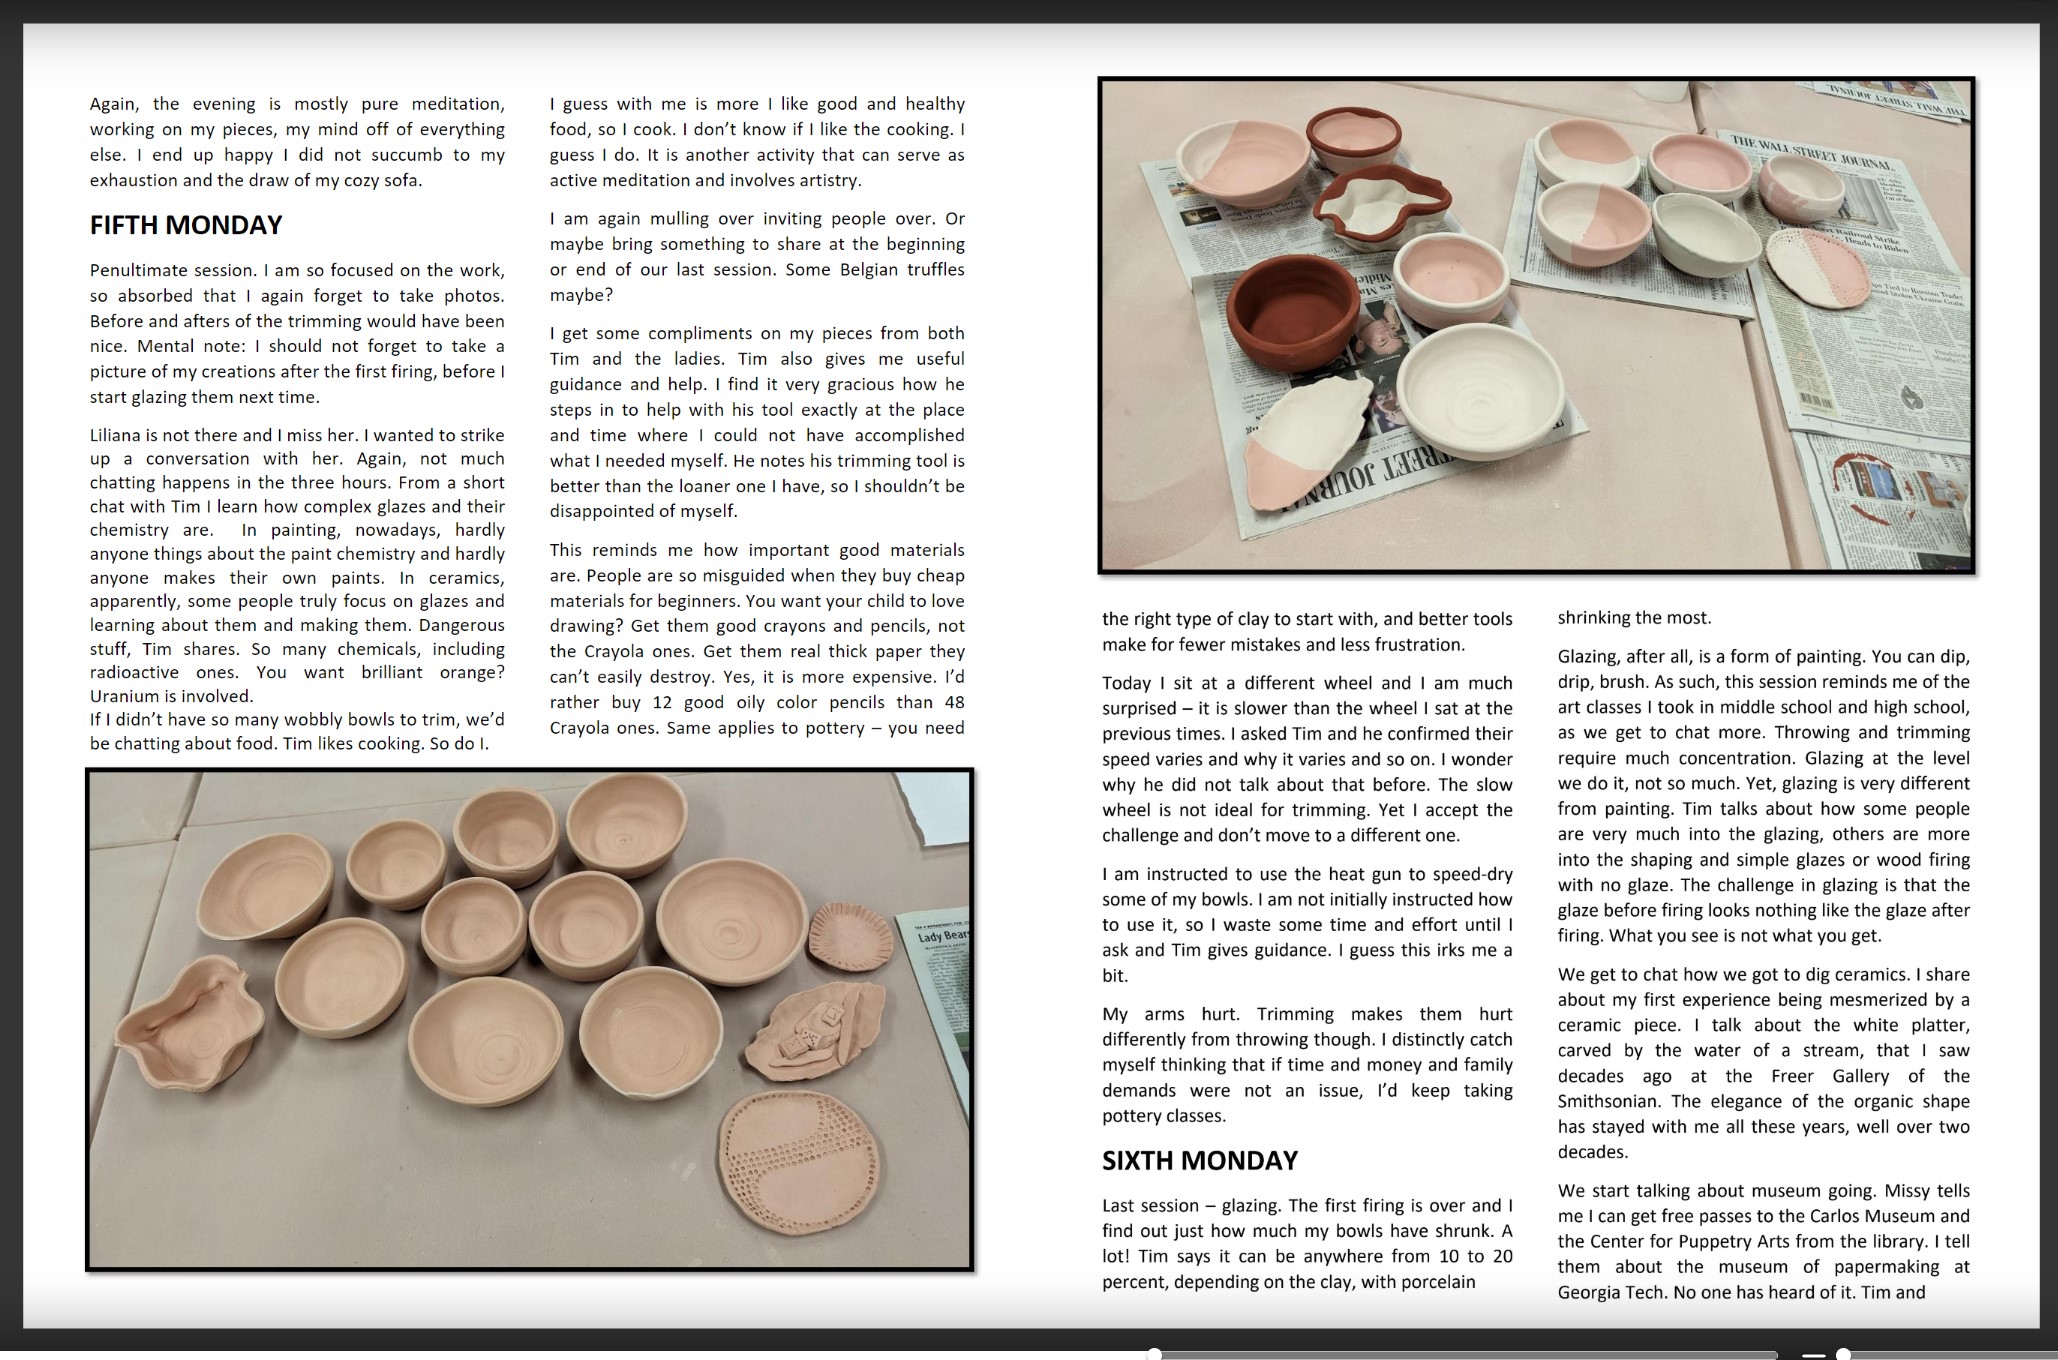 Diary of an Adult Pottery Adventure / Screenshot of pages 8 and 9 from "Diary of an Adult Pottery Adventure", an autoethnographic a/r/tography project, available to view at https://issuu.com/home/published/diary_of_an_adult_pottery_adventure_by_anna_trayko